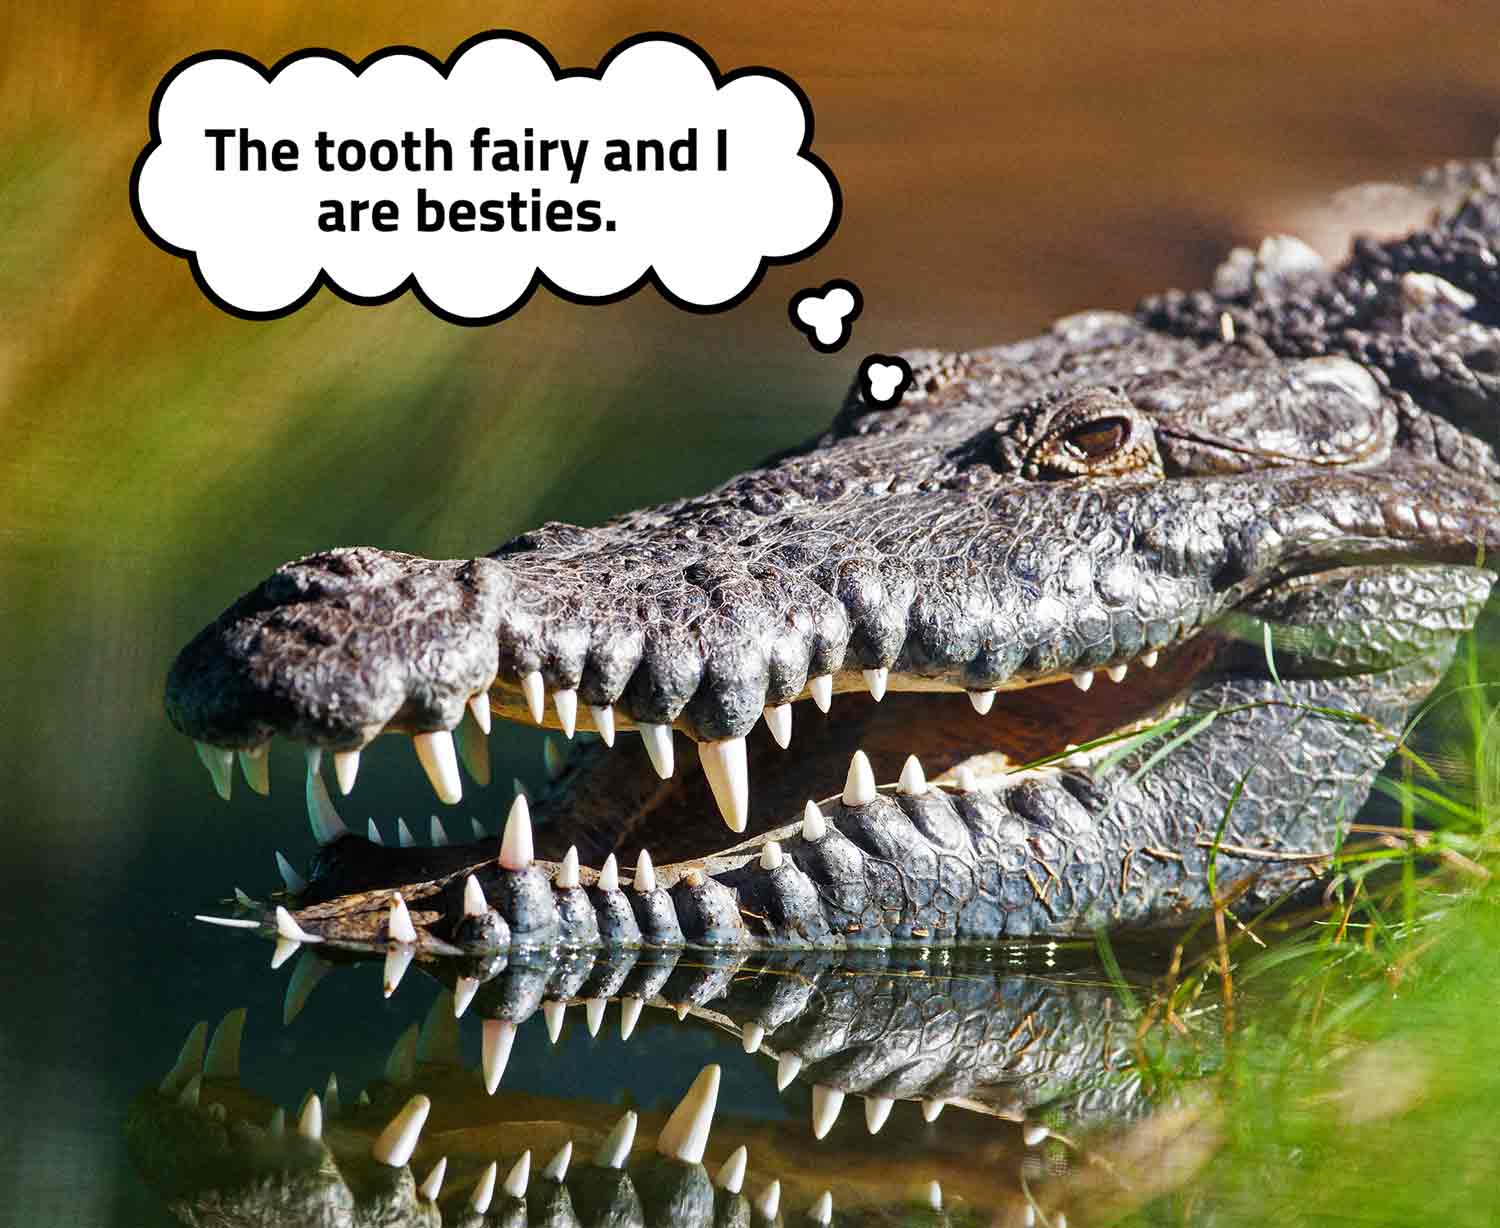 Closeup of a crocodile resting on the surface of water with talk bubble saying the tooth fairy and I are besties.